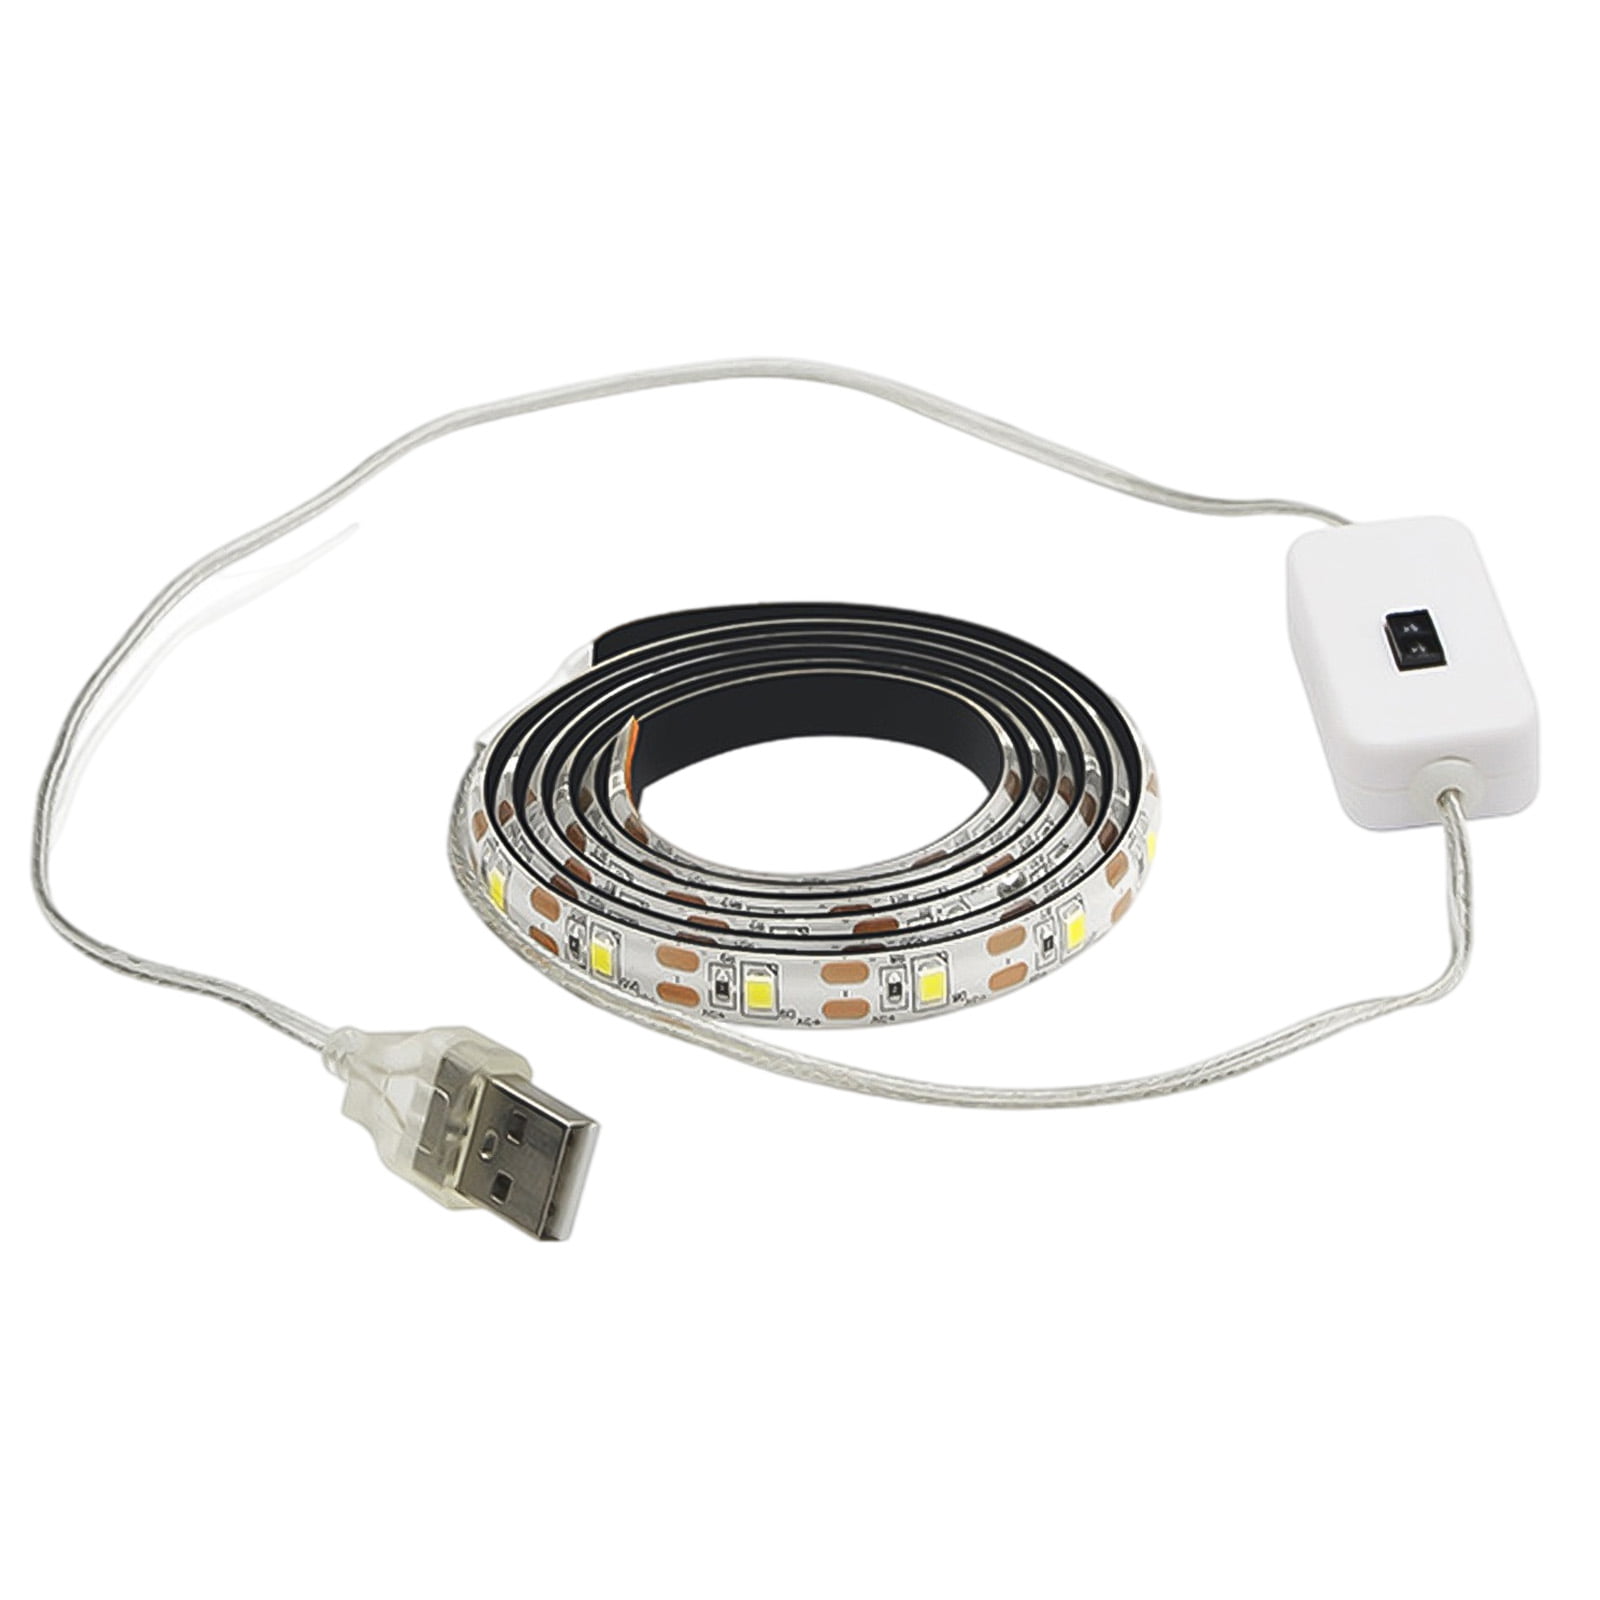 Multi Charging Cable Portable 3 in 1 Graffiti Throw Pillow USB Power Cords for Cell Phone Tablets and More Devices Charging 